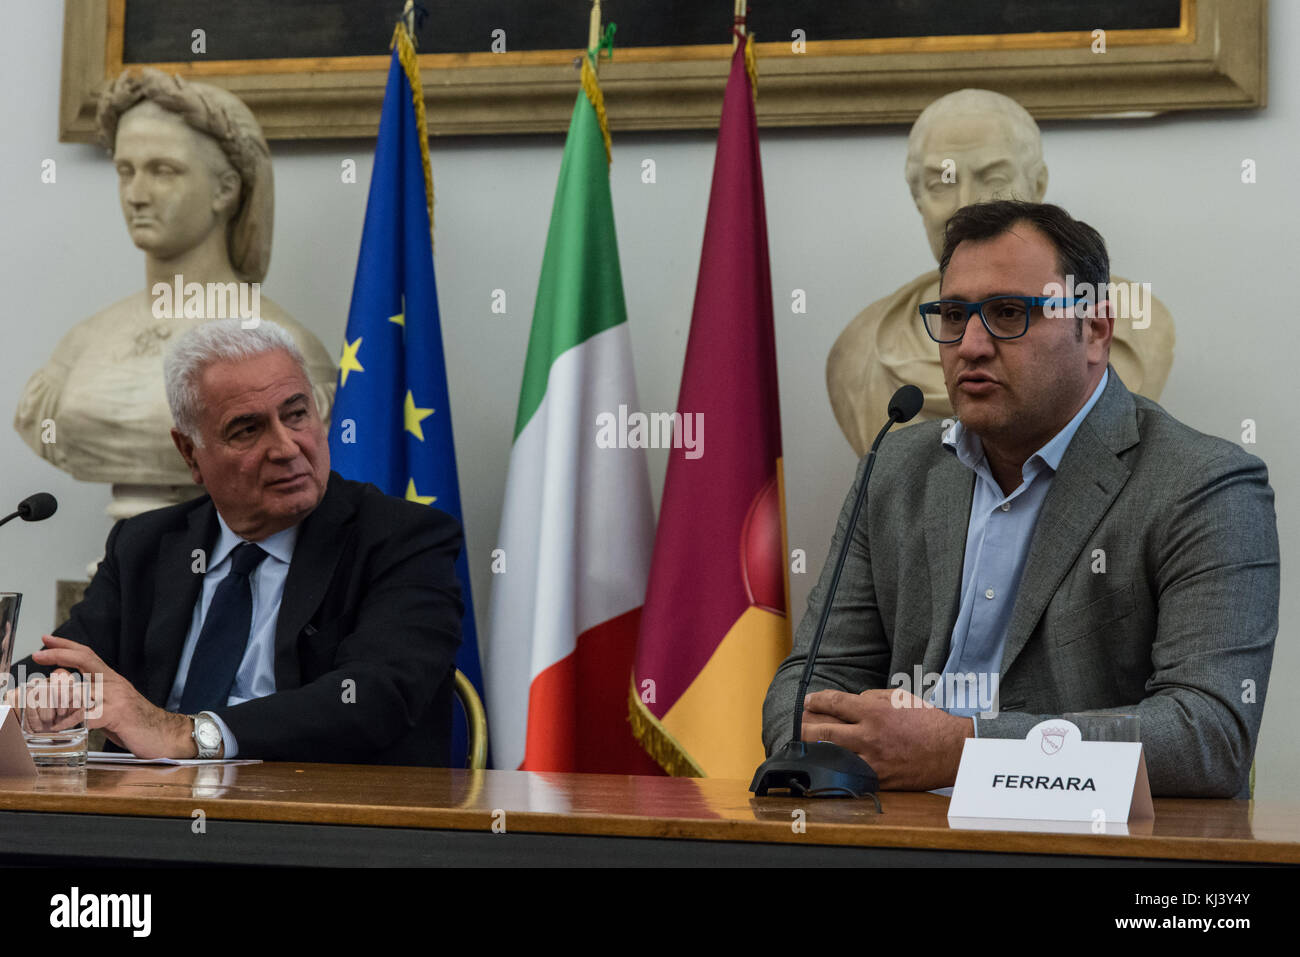 Rome, Italy. 20th Nov, 2017. Domenico Vulpiani and Paolo Ferrara during Press conference of the mayor of Rome Virginia Raggi presents the project of redevelopment of the coast of Ostia, after the victory of the Movimeto five stars (M5S) of the tenth town Hall on November 20, 2017 in Rome, Italy Credit: Andrea Ronchini/Pacific Press/Alamy Live News Stock Photo